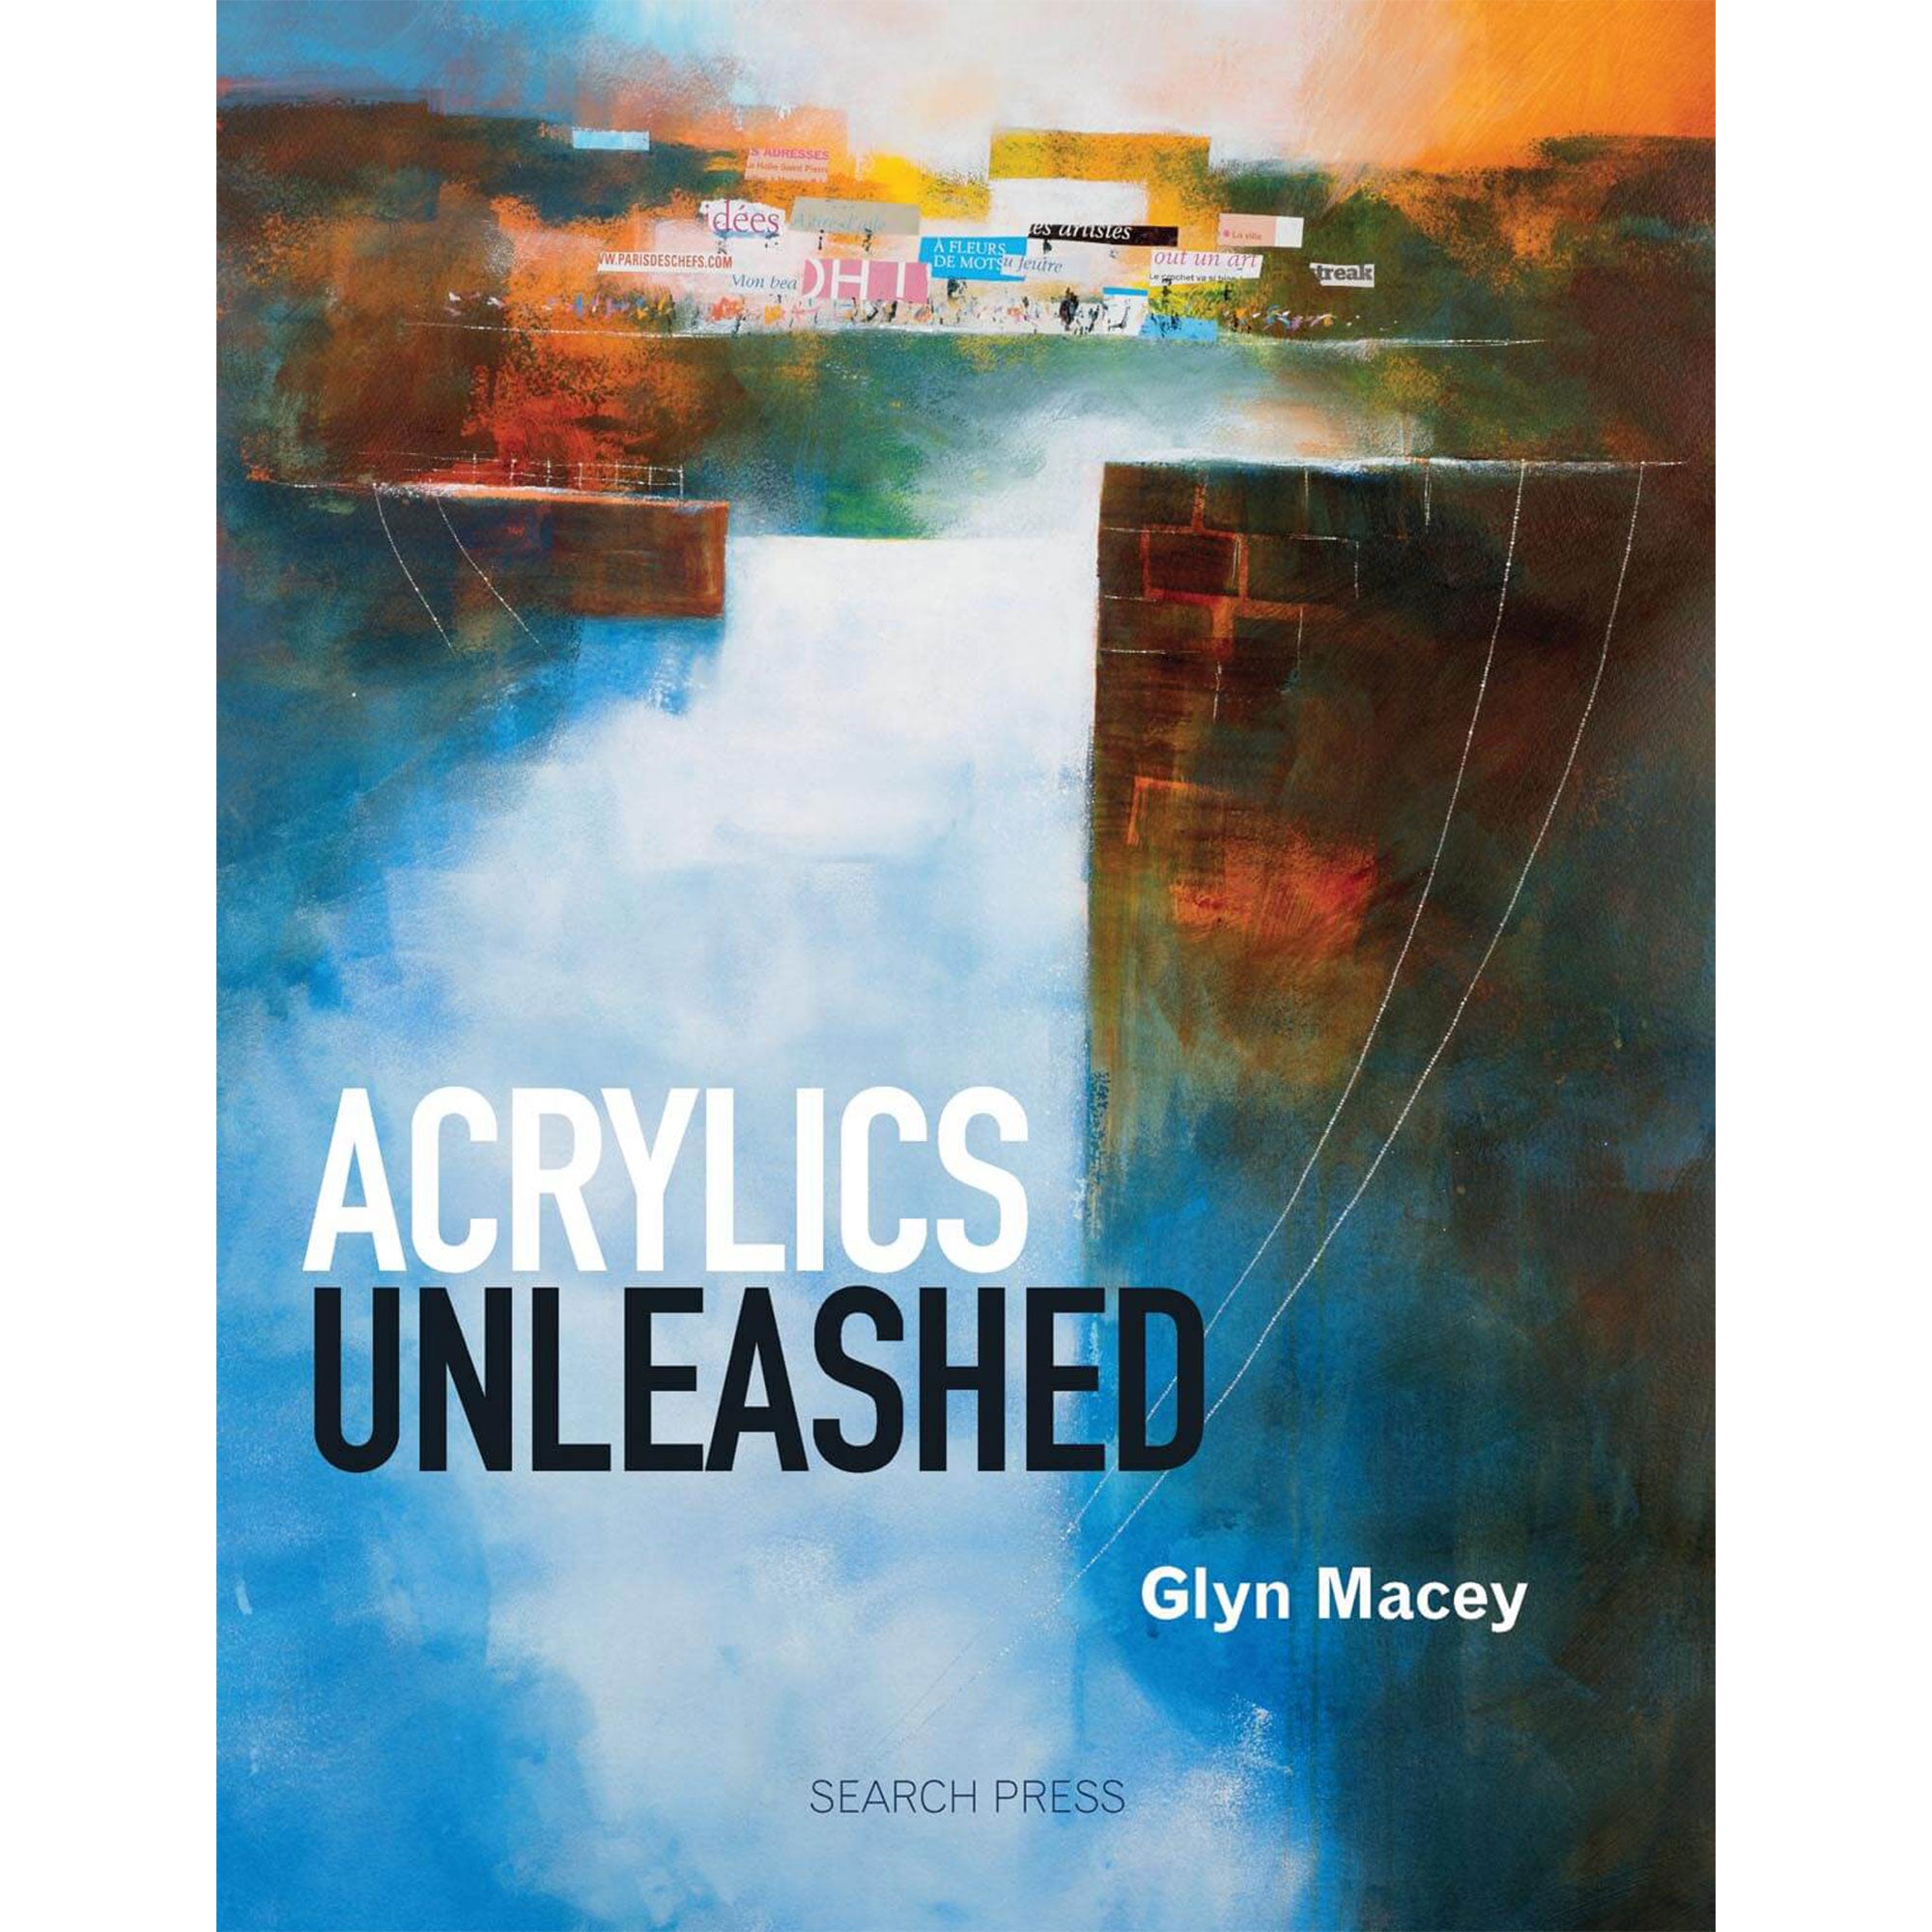 Acrylics Unleashed by Glyn Macey Book Cover